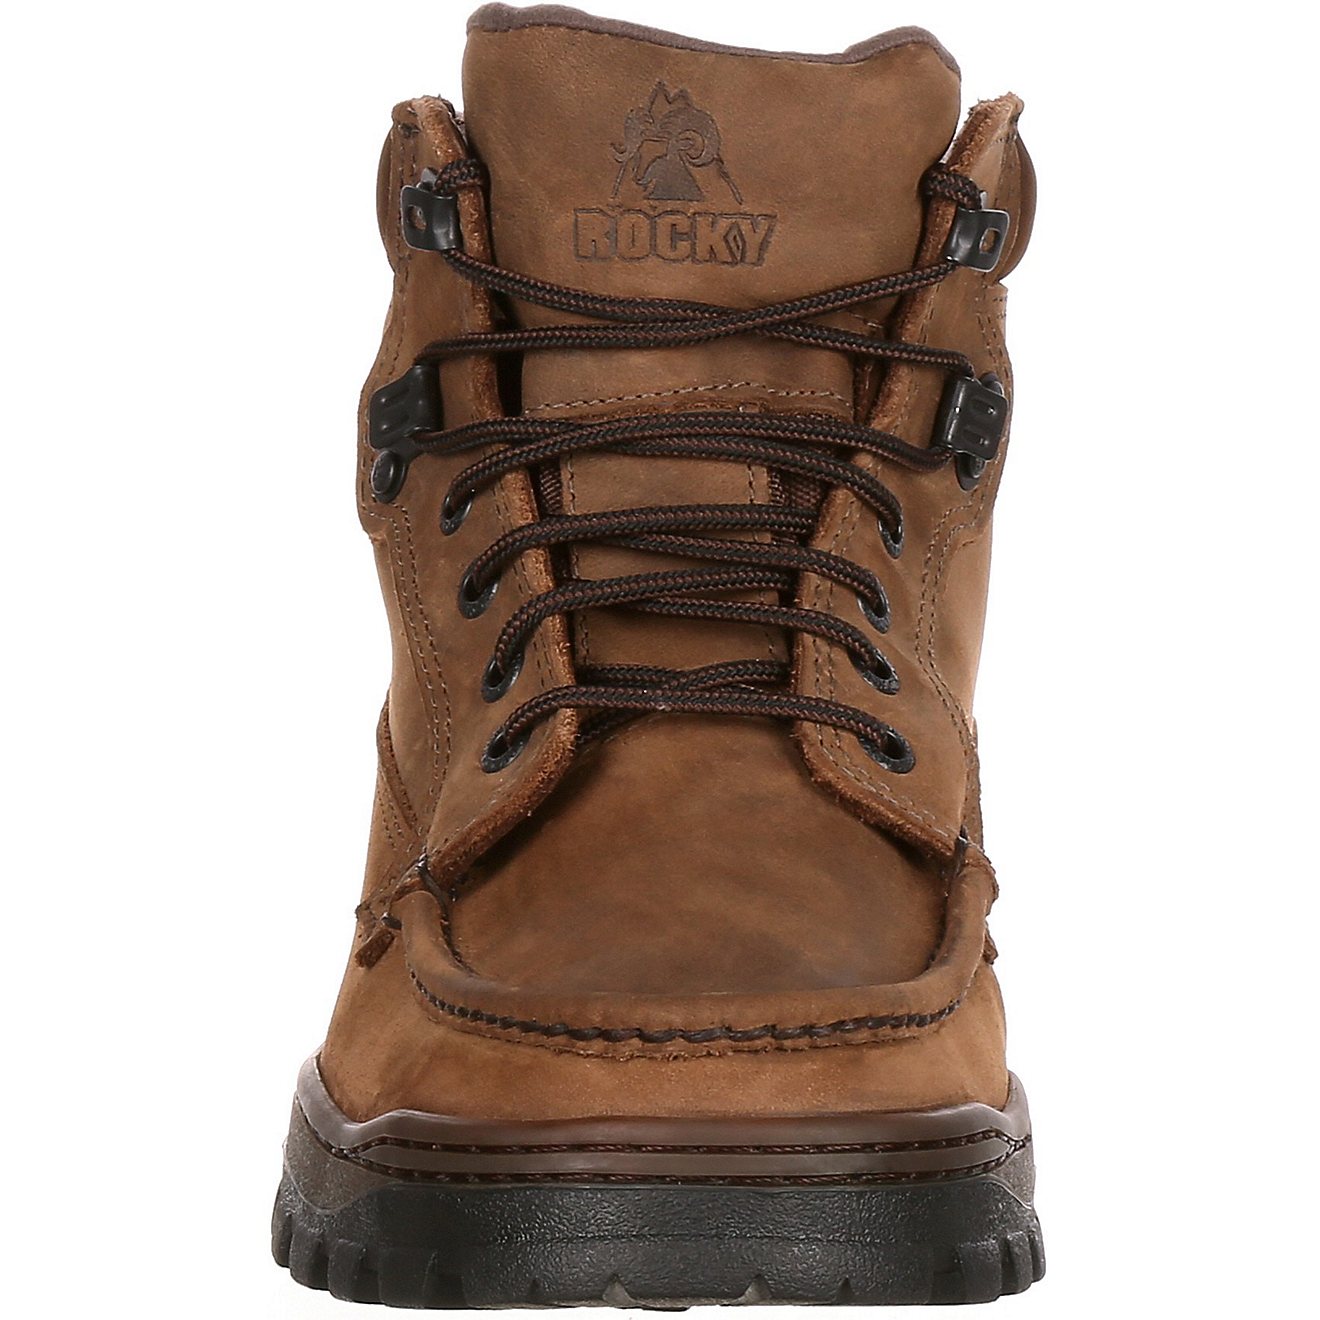 Rocky Men's Outback GORE-TEX 6 in Waterproof Hiking Boots                                                                        - view number 3